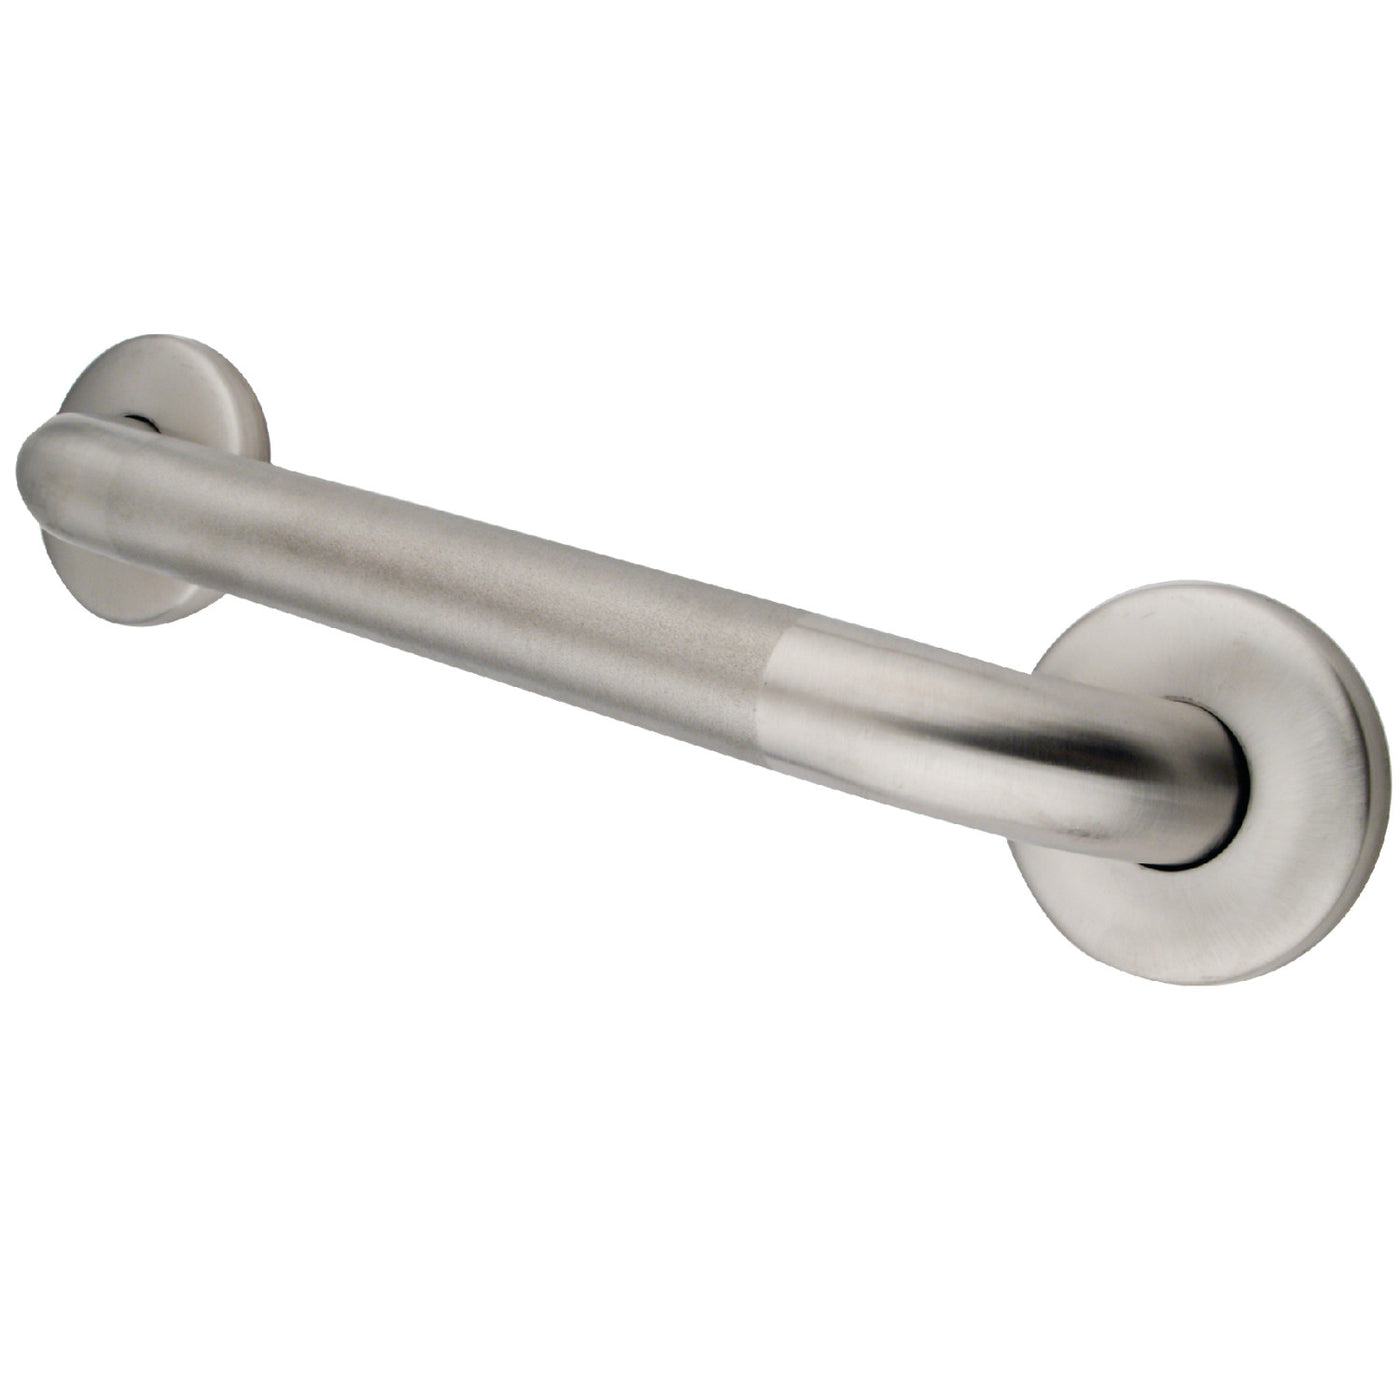 Elements of Design EGB1430CT 30-Inch Stainless Steel Grab Bar, Brushed